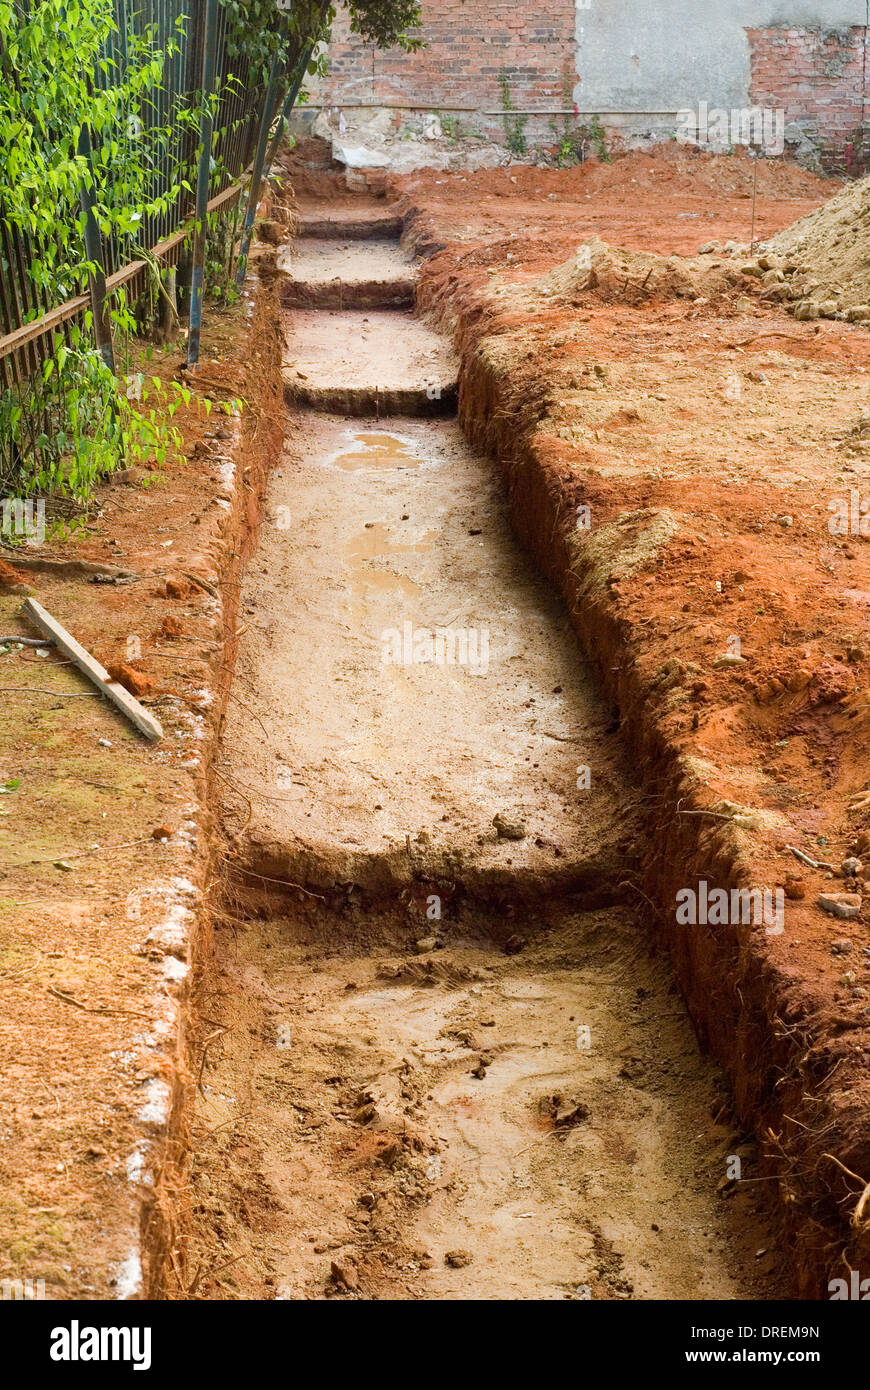 Digging a trench foundation for constructing a high boundary wall for home property. Stock Photo